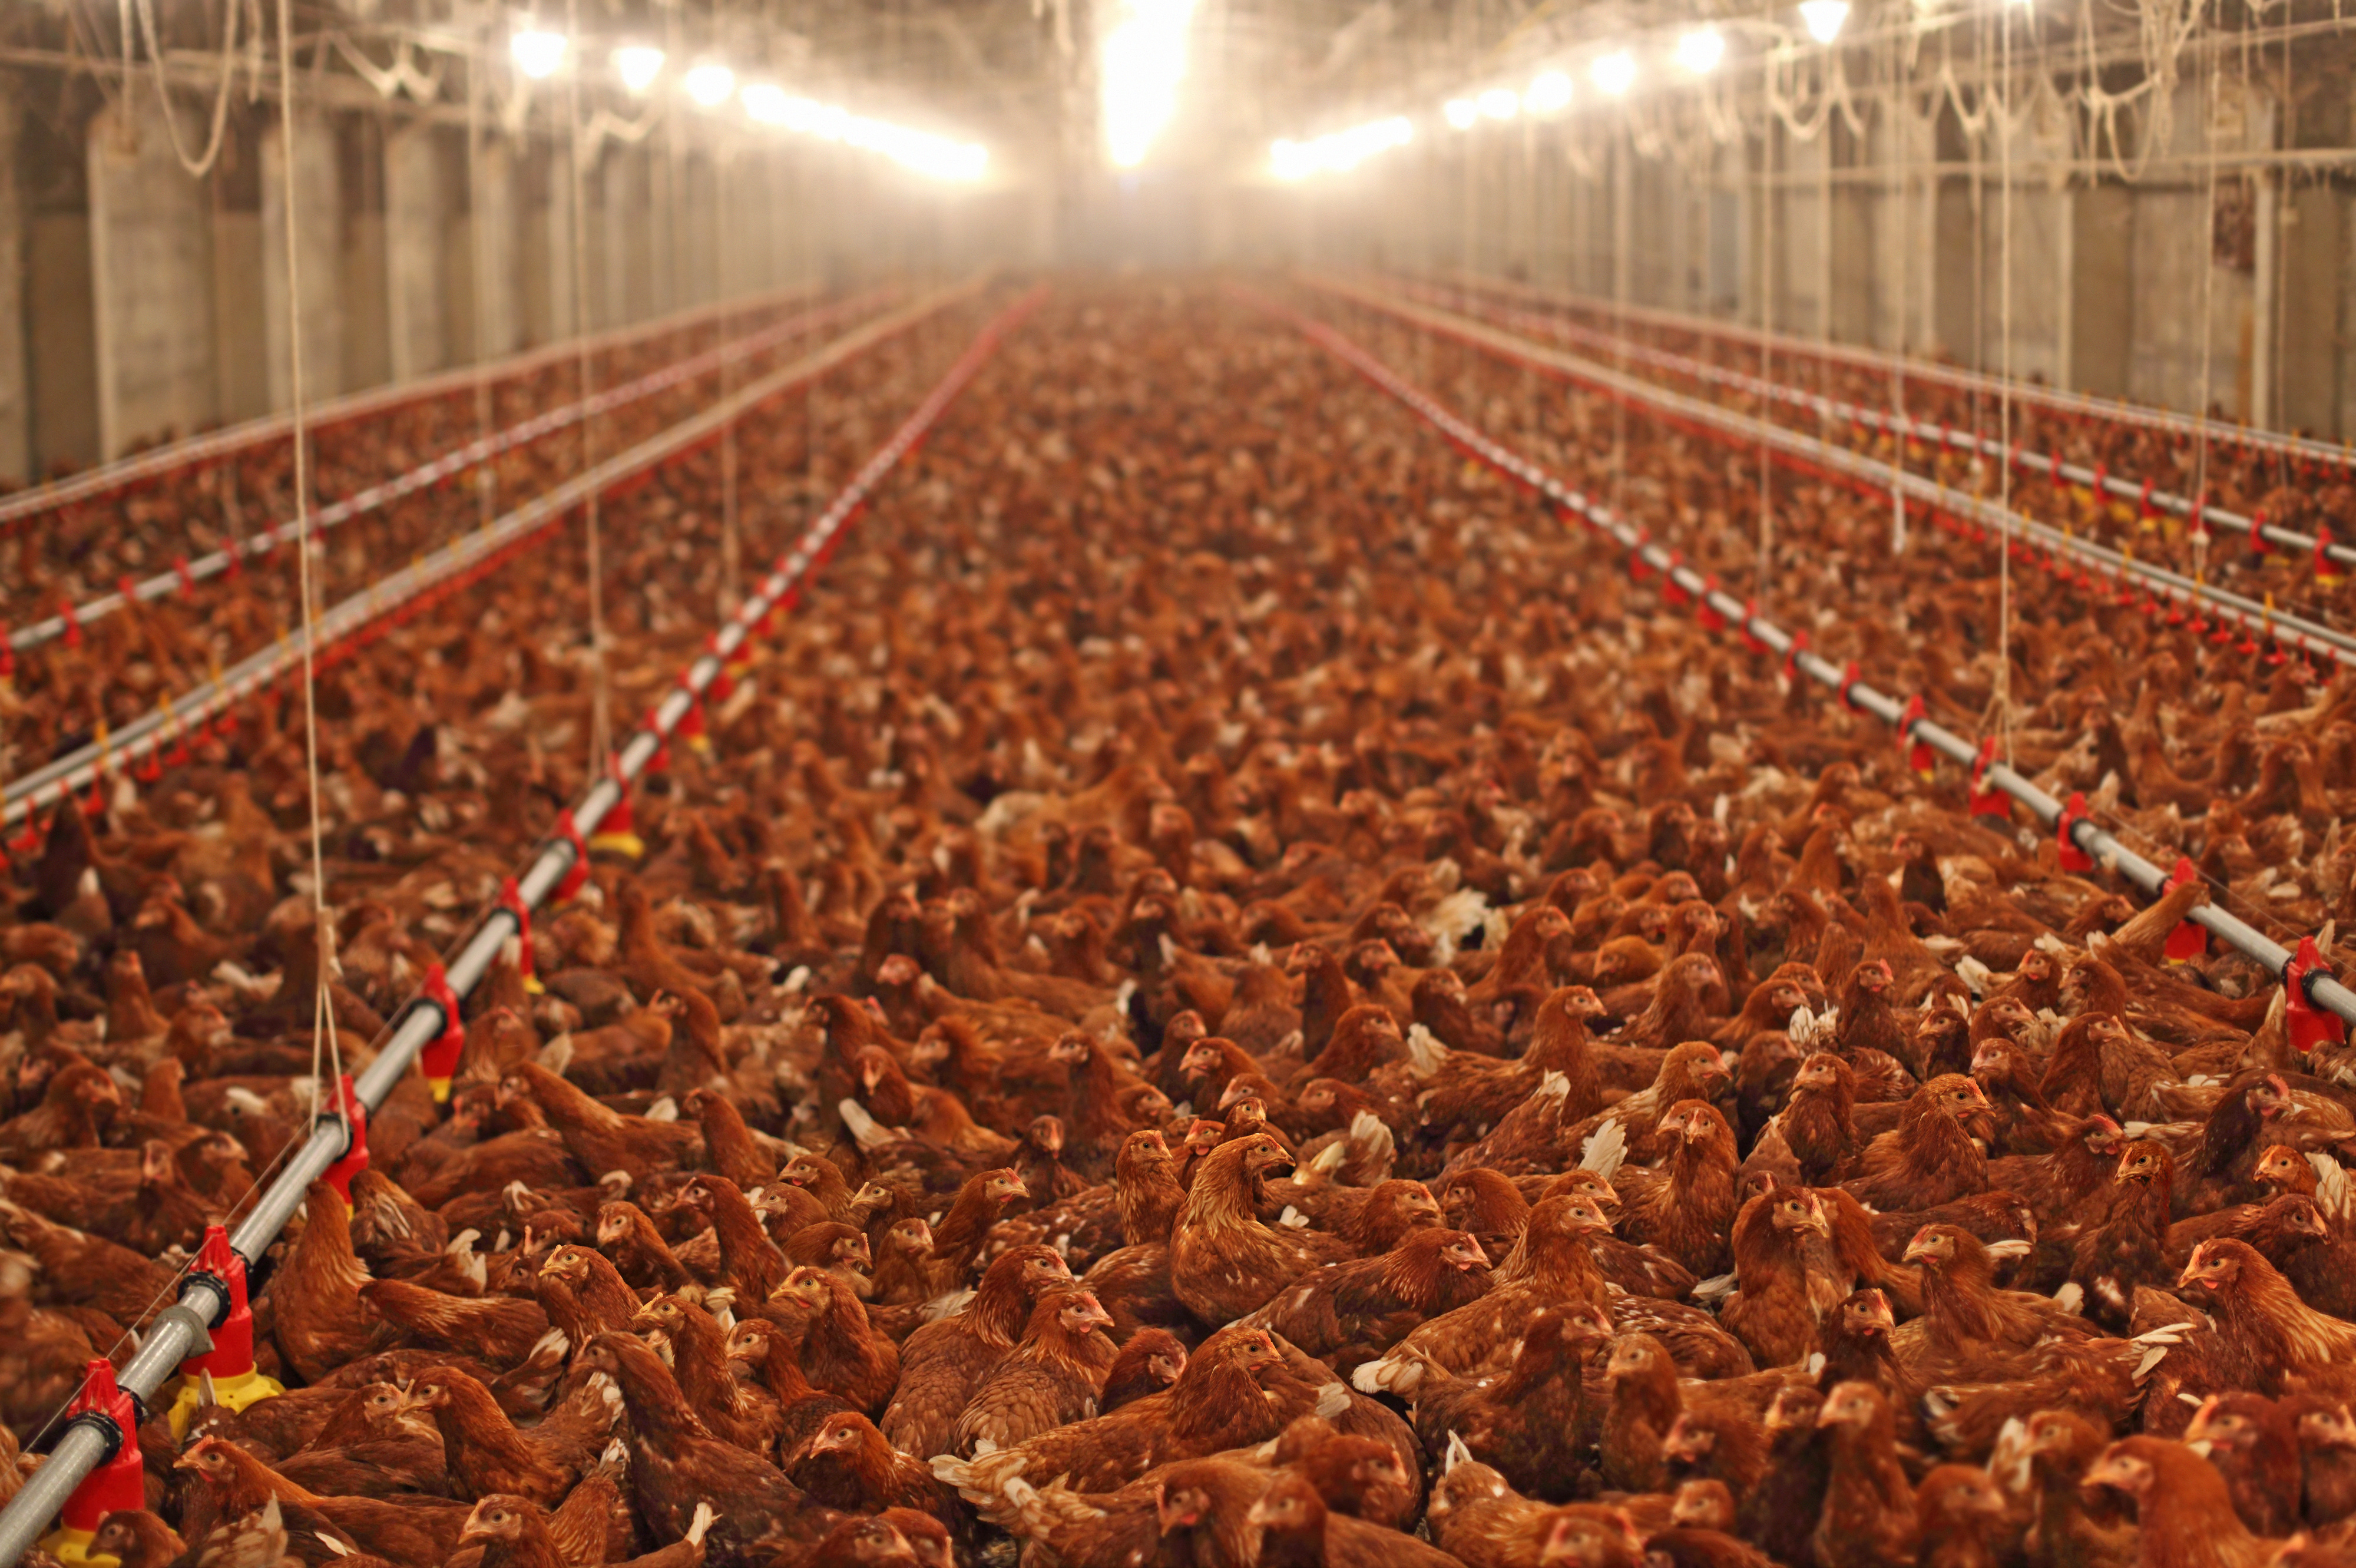 Thousands of laying hens in an indoor poultry barn